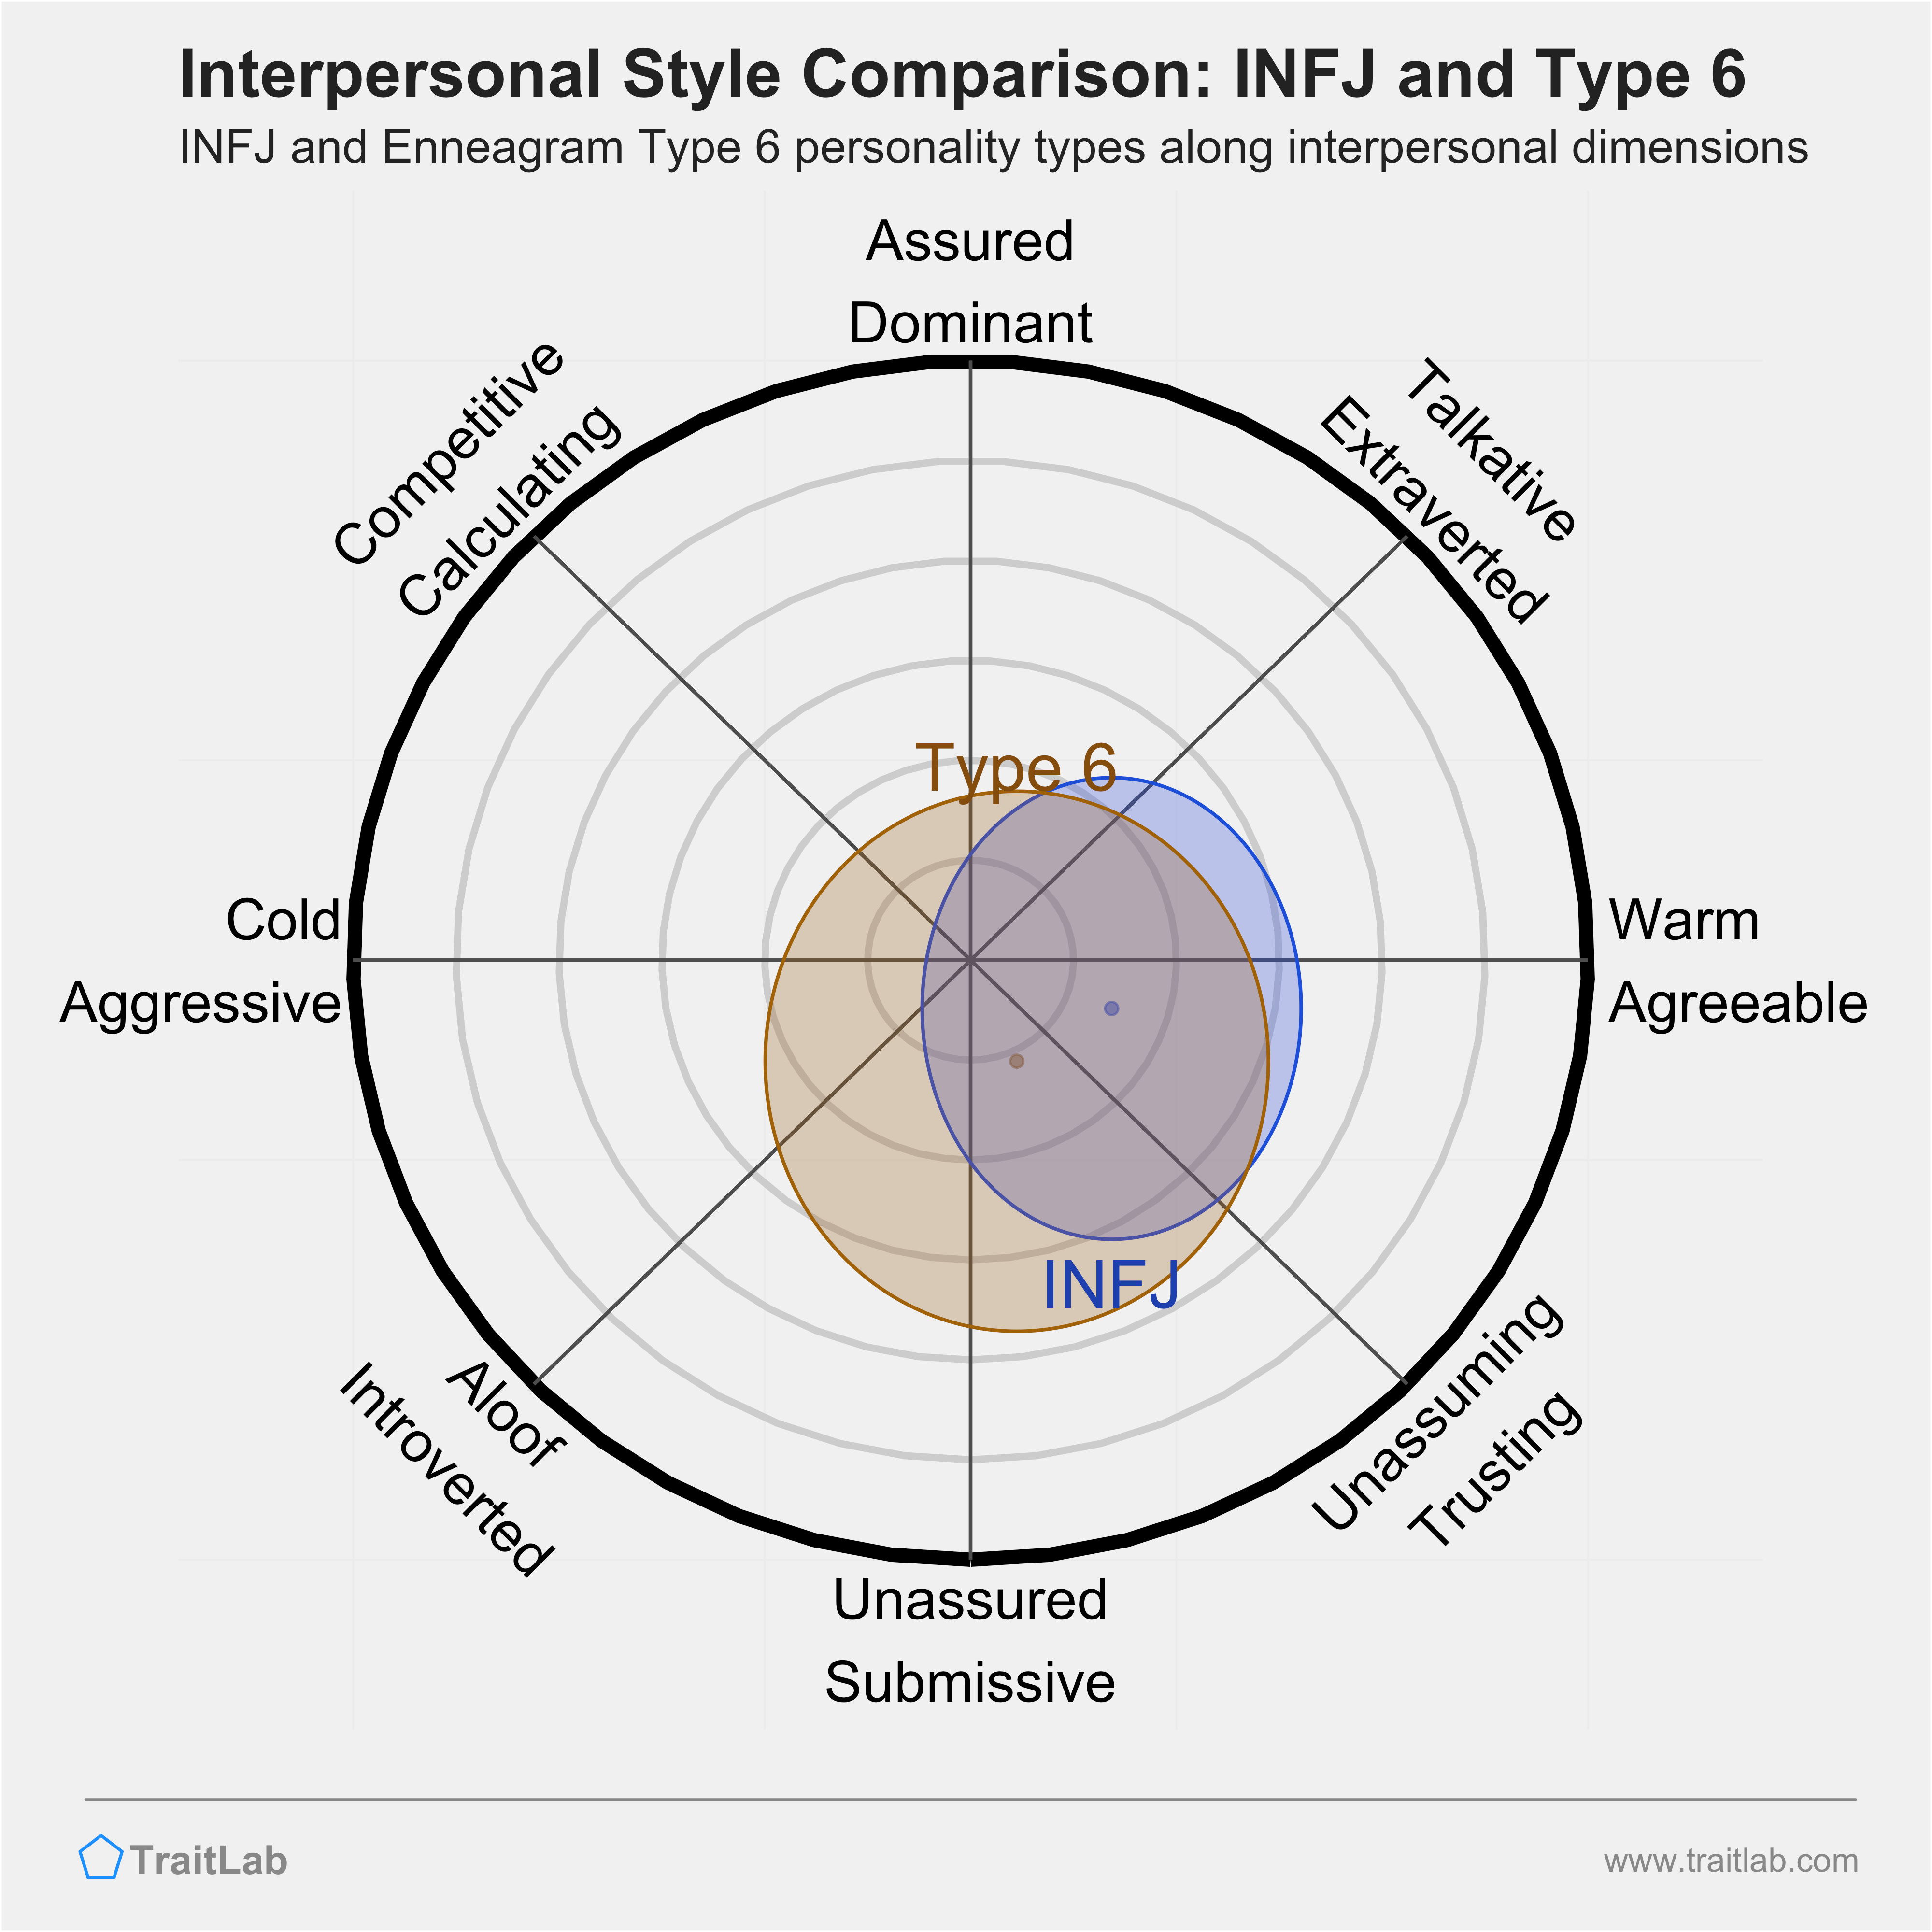 Enneagram INFJ and Type 6 comparison across interpersonal dimensions